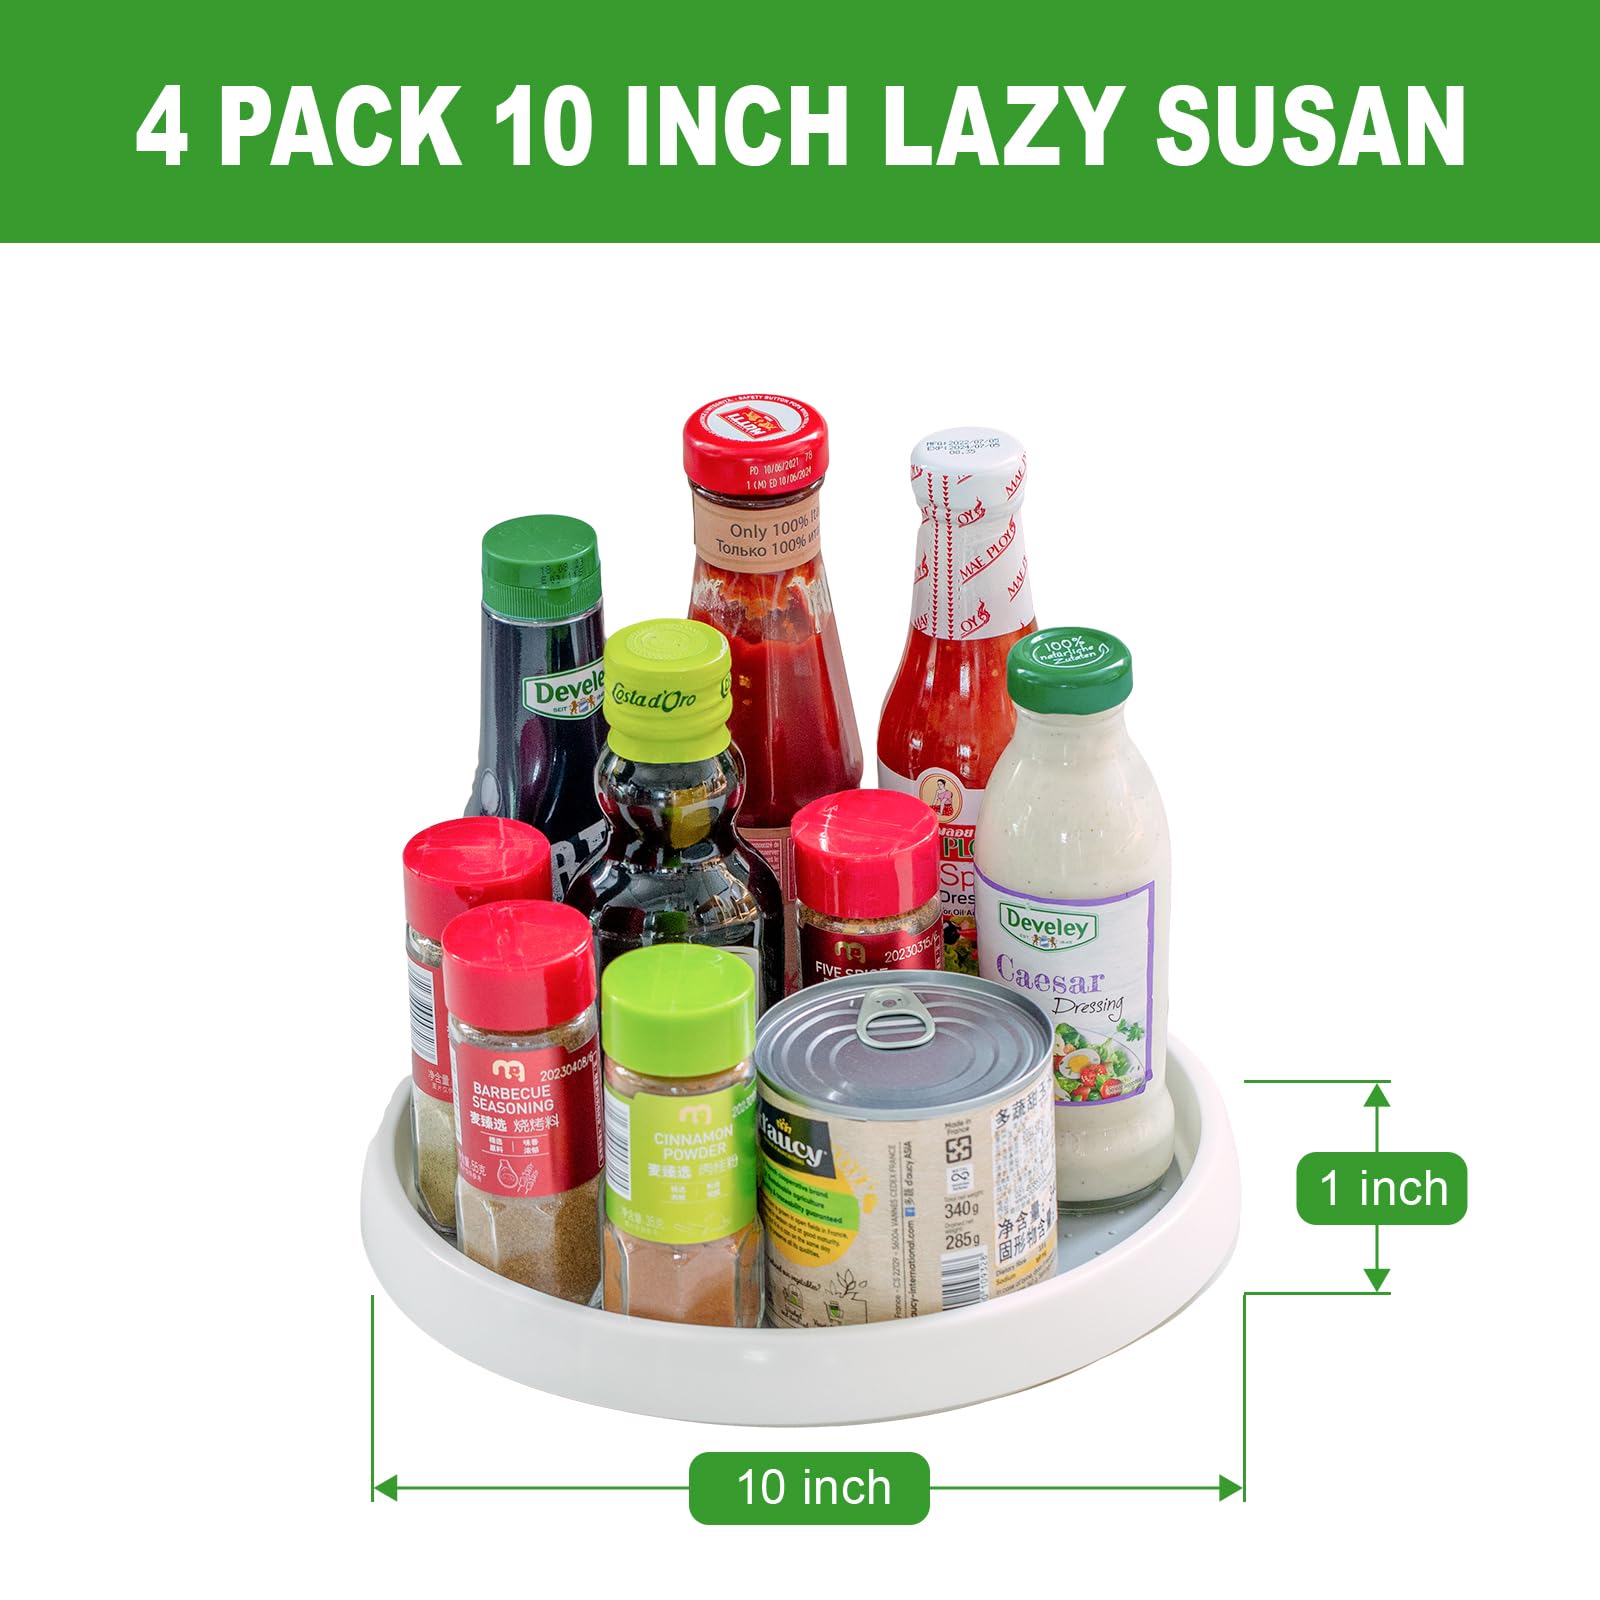 4 Pack 10 Inch Non Skid Lazy Susan Organizers - Turntable Rack for Pantry Organization, Cabinet and Storage - Kitchen Spice Rack, Fridge, Bathroom, Dressing Table, Under Sink Organizing Rack